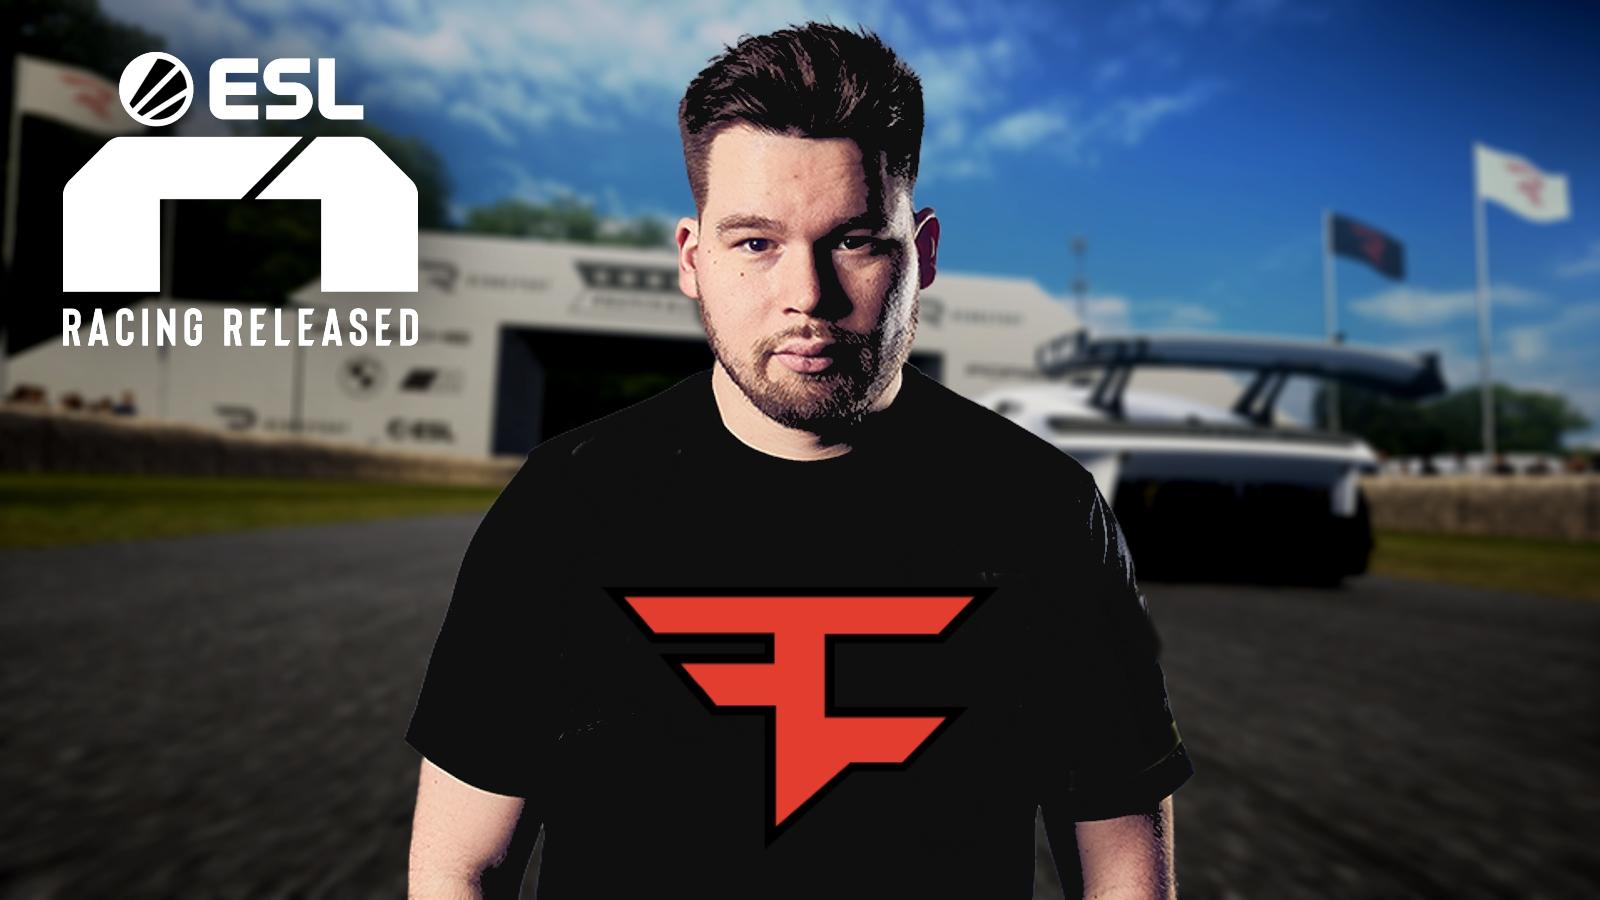 crimsix with faze clan logo and ESL R1 logo above screengrab from Rennsport